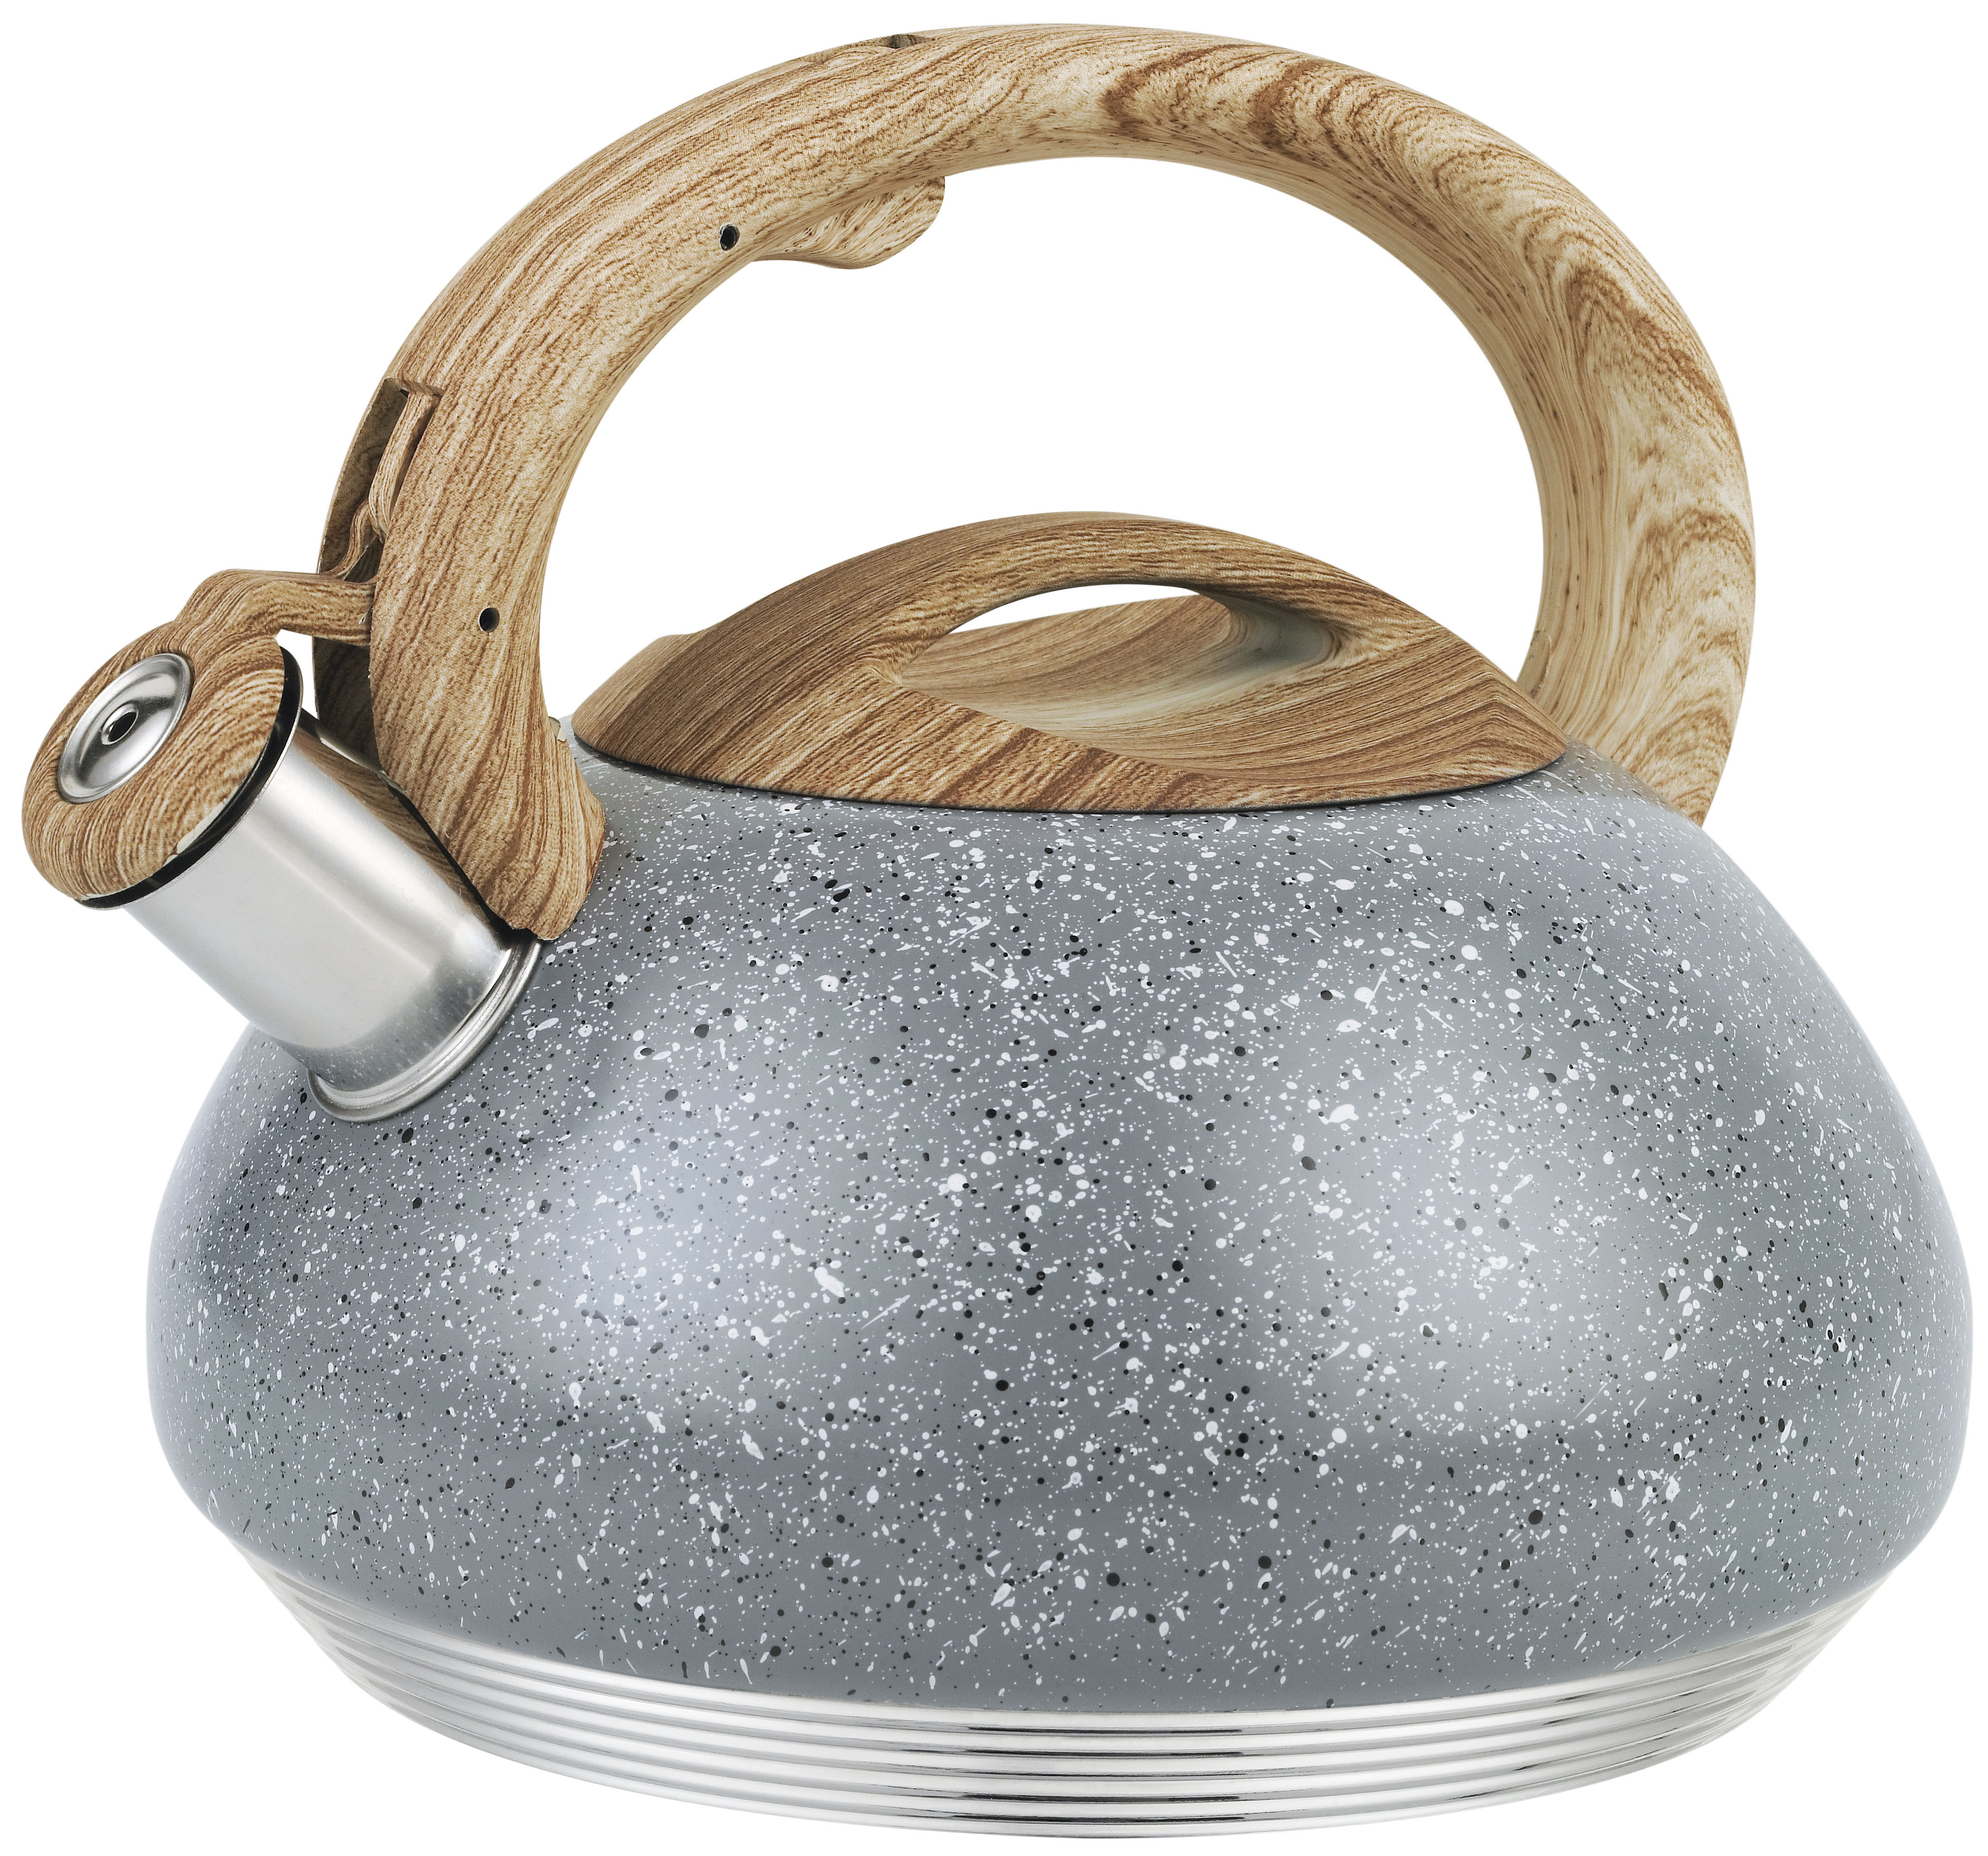 Whistling Tea Kettle,kettle Water Kettles with Whistle -quart